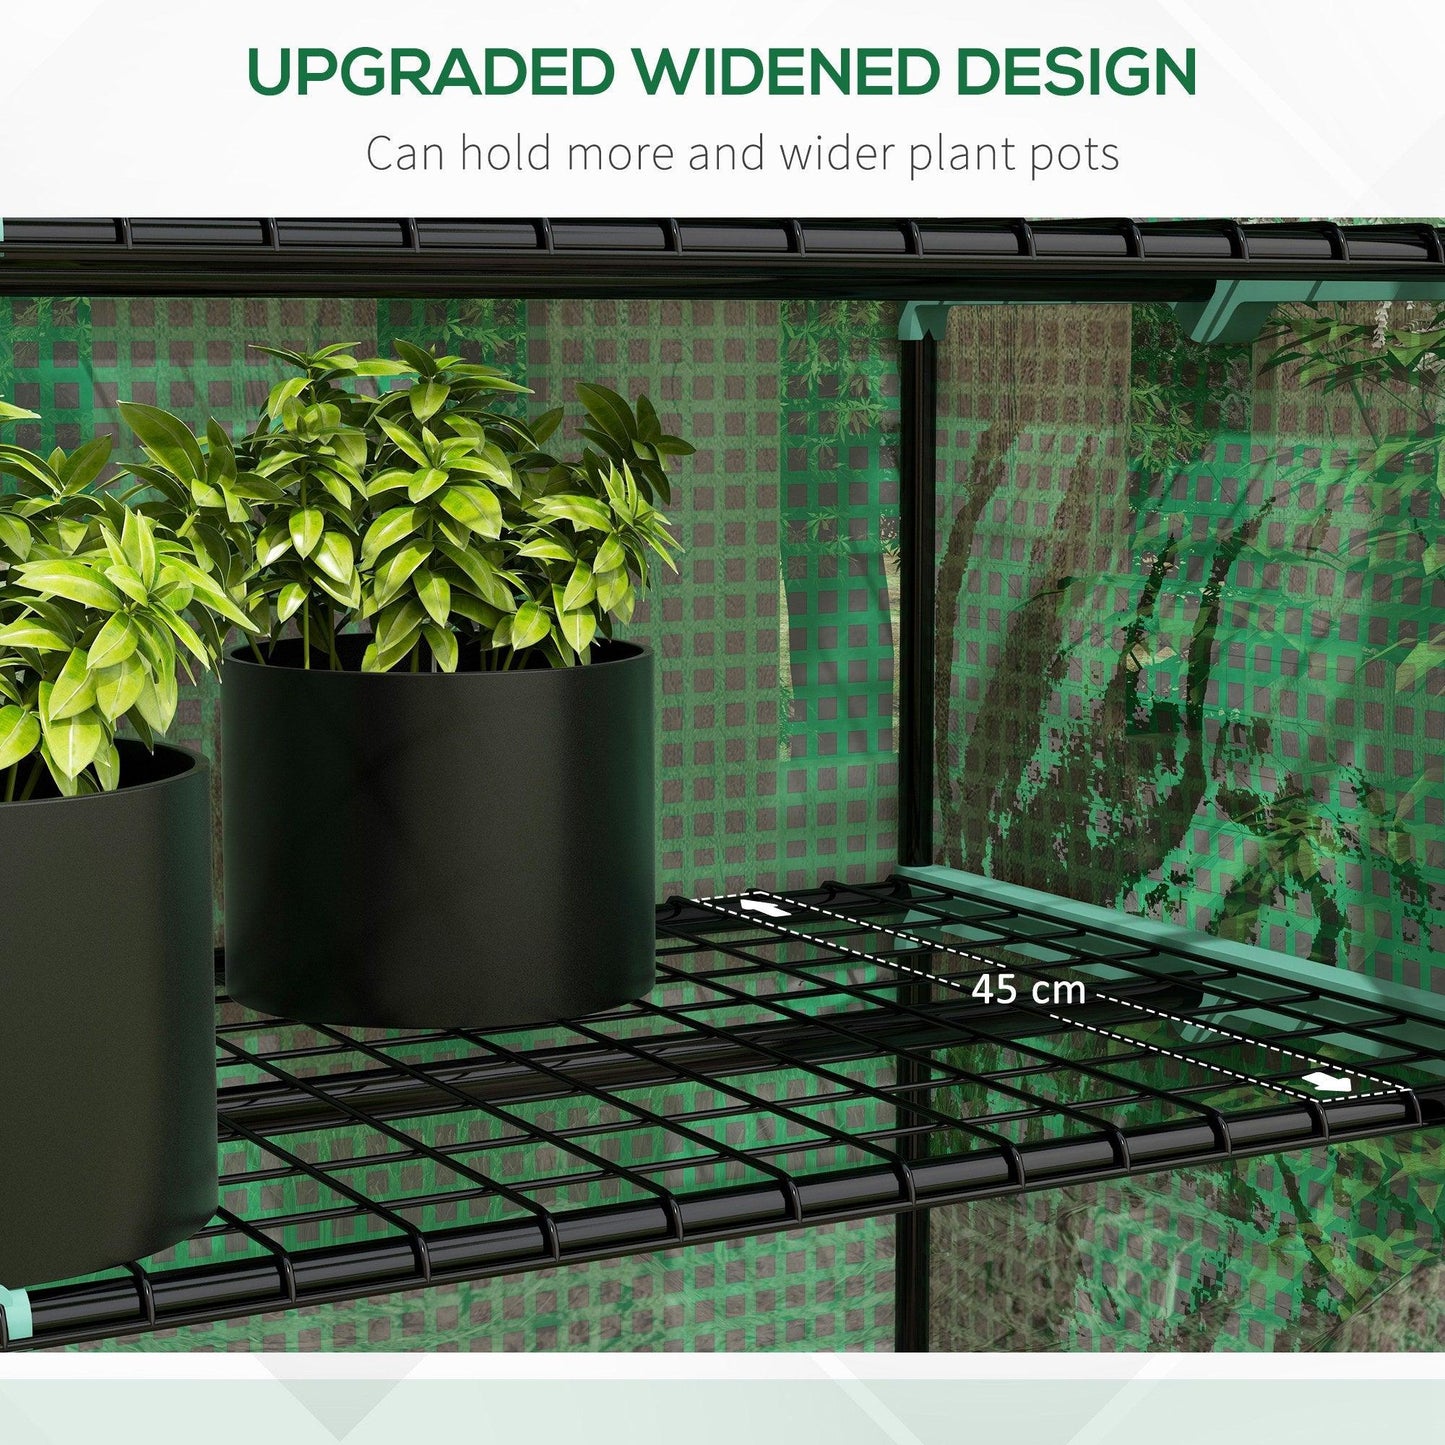 Outsunny 5 Tier Widened Mini Greenhouse w/ Reinforced PE Cover, Portable Green House w/ Roll-up Door & Wire Shelves, 193H x 90W x 49Dcm, Green - ALL4U RETAILER LTD